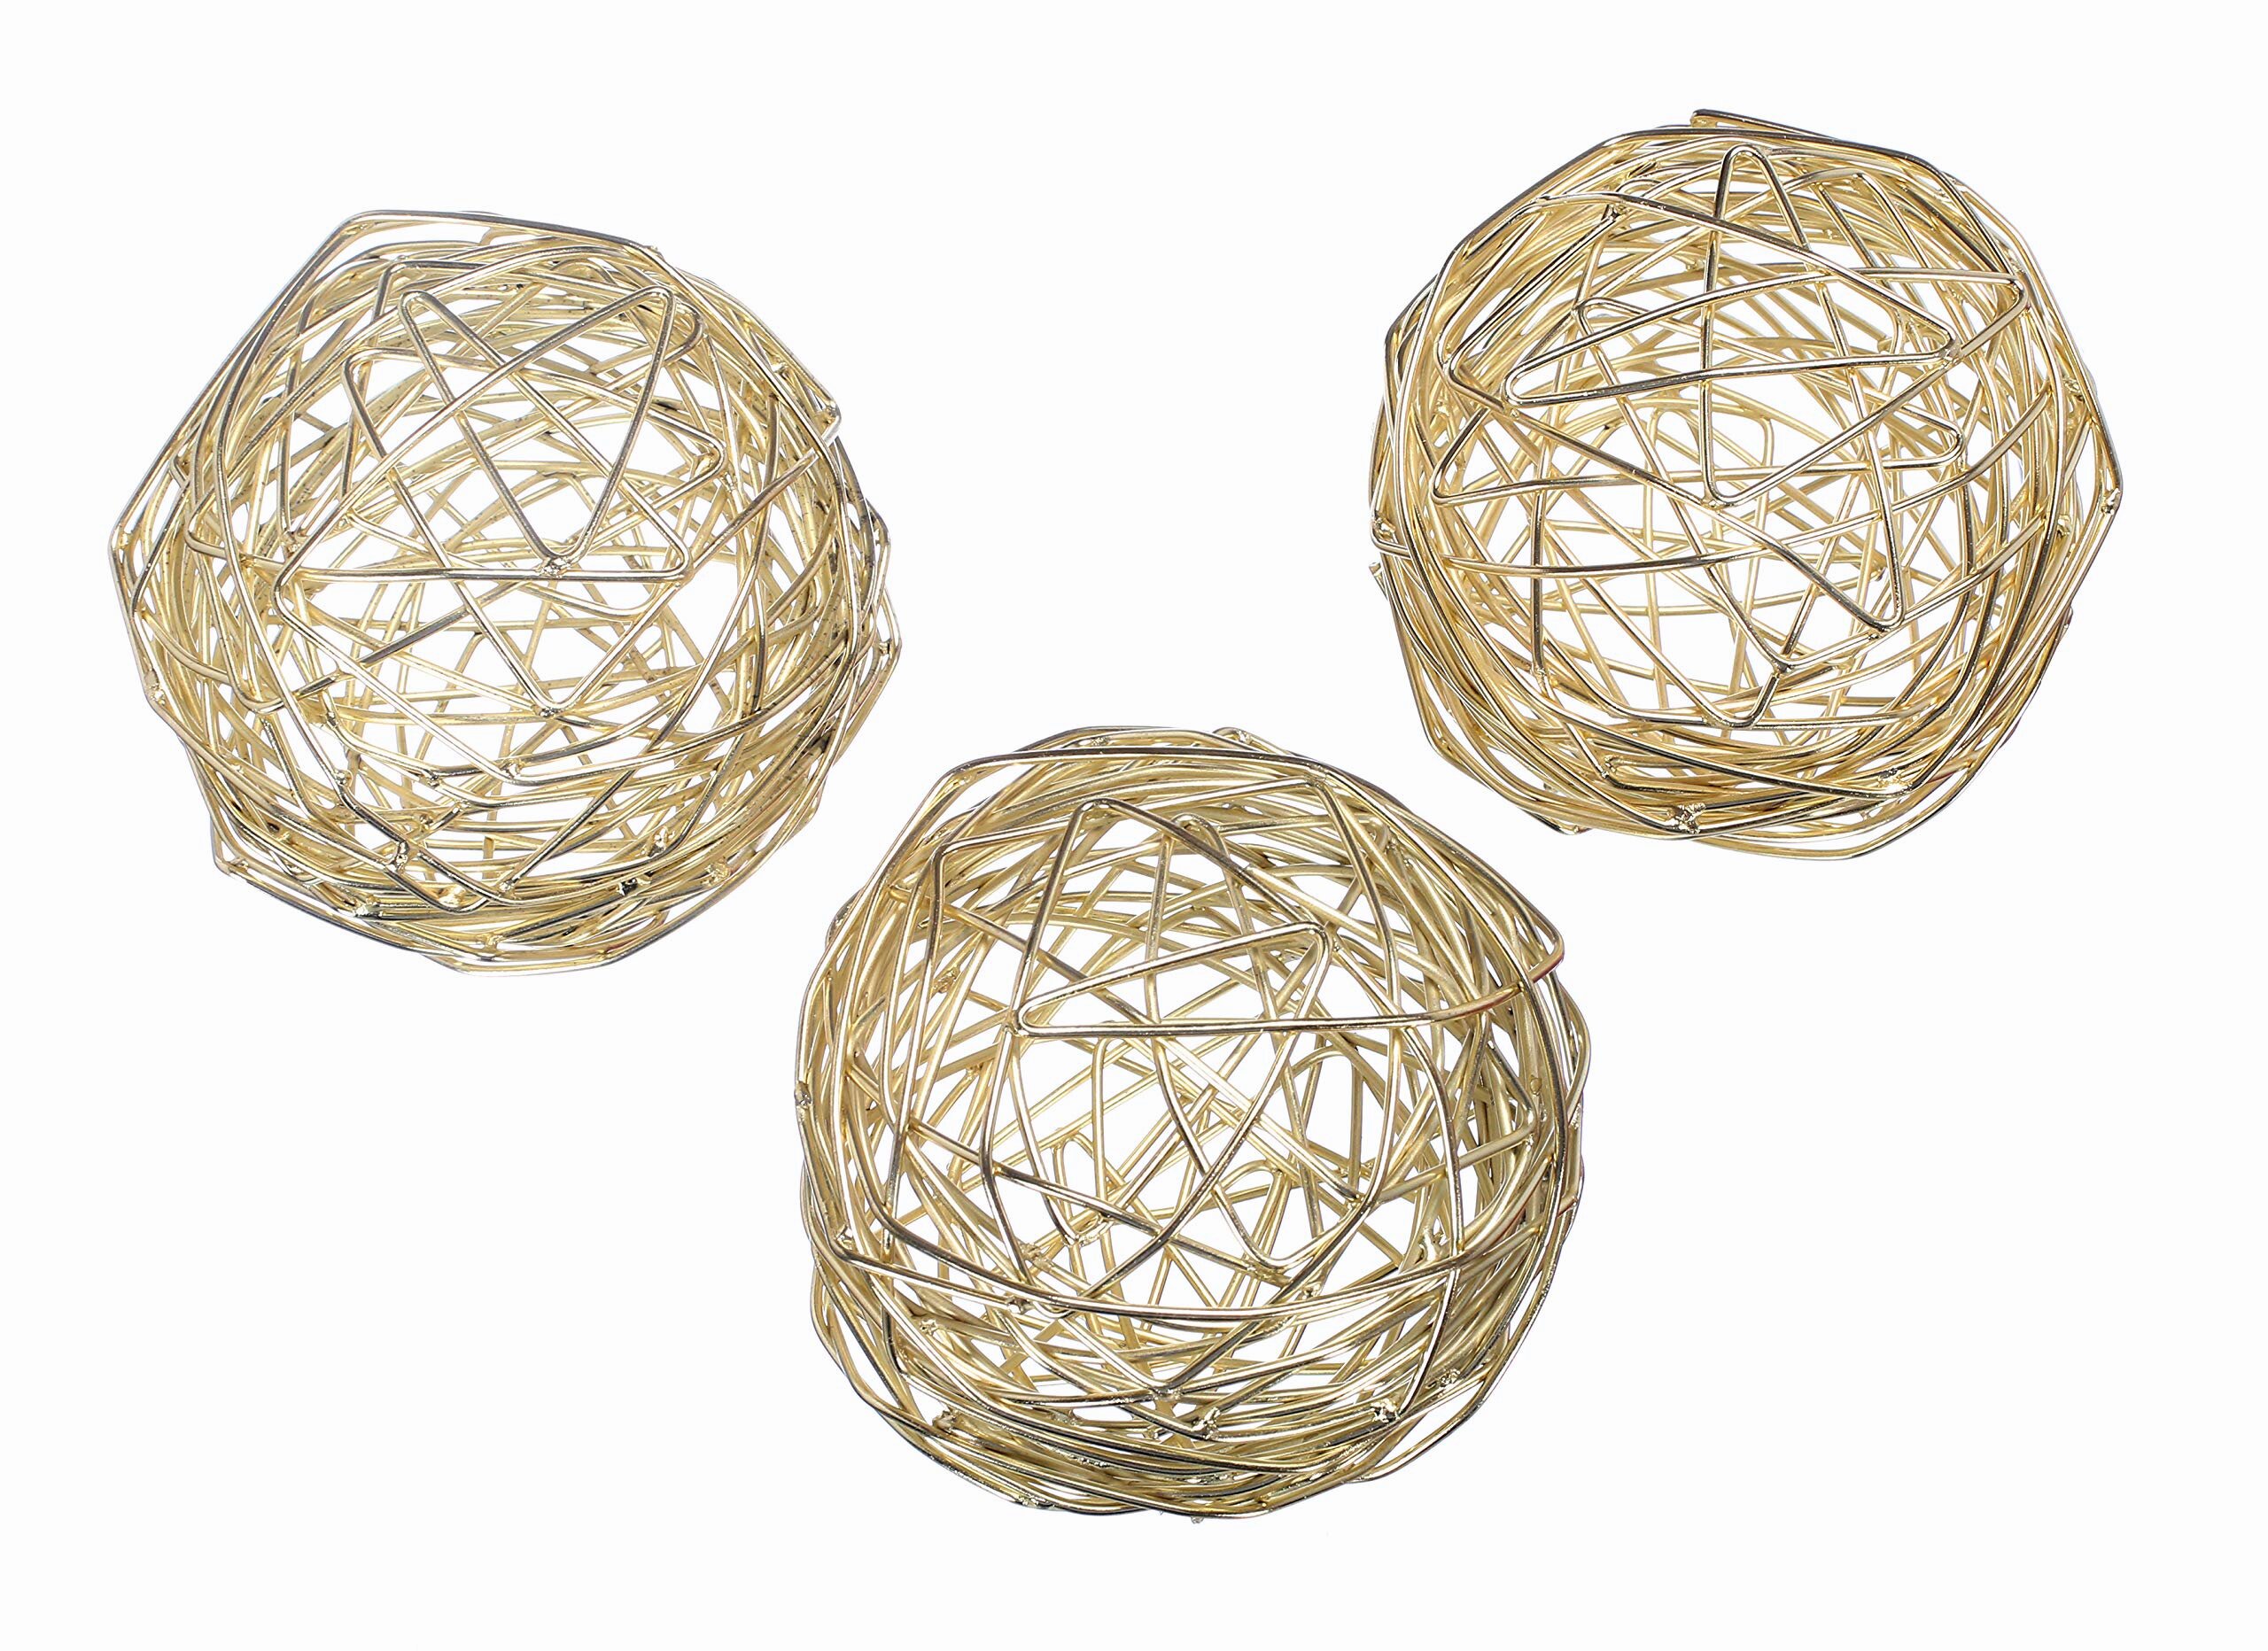 Themed Party Aromatherapy Accessories White Metal Band Decorative Dining Ball Set of 3 Geometric Sculptures Dining/Coffee Table Centerpiece for Wedding Table Decoration Baby Shower 4.5 Inches 